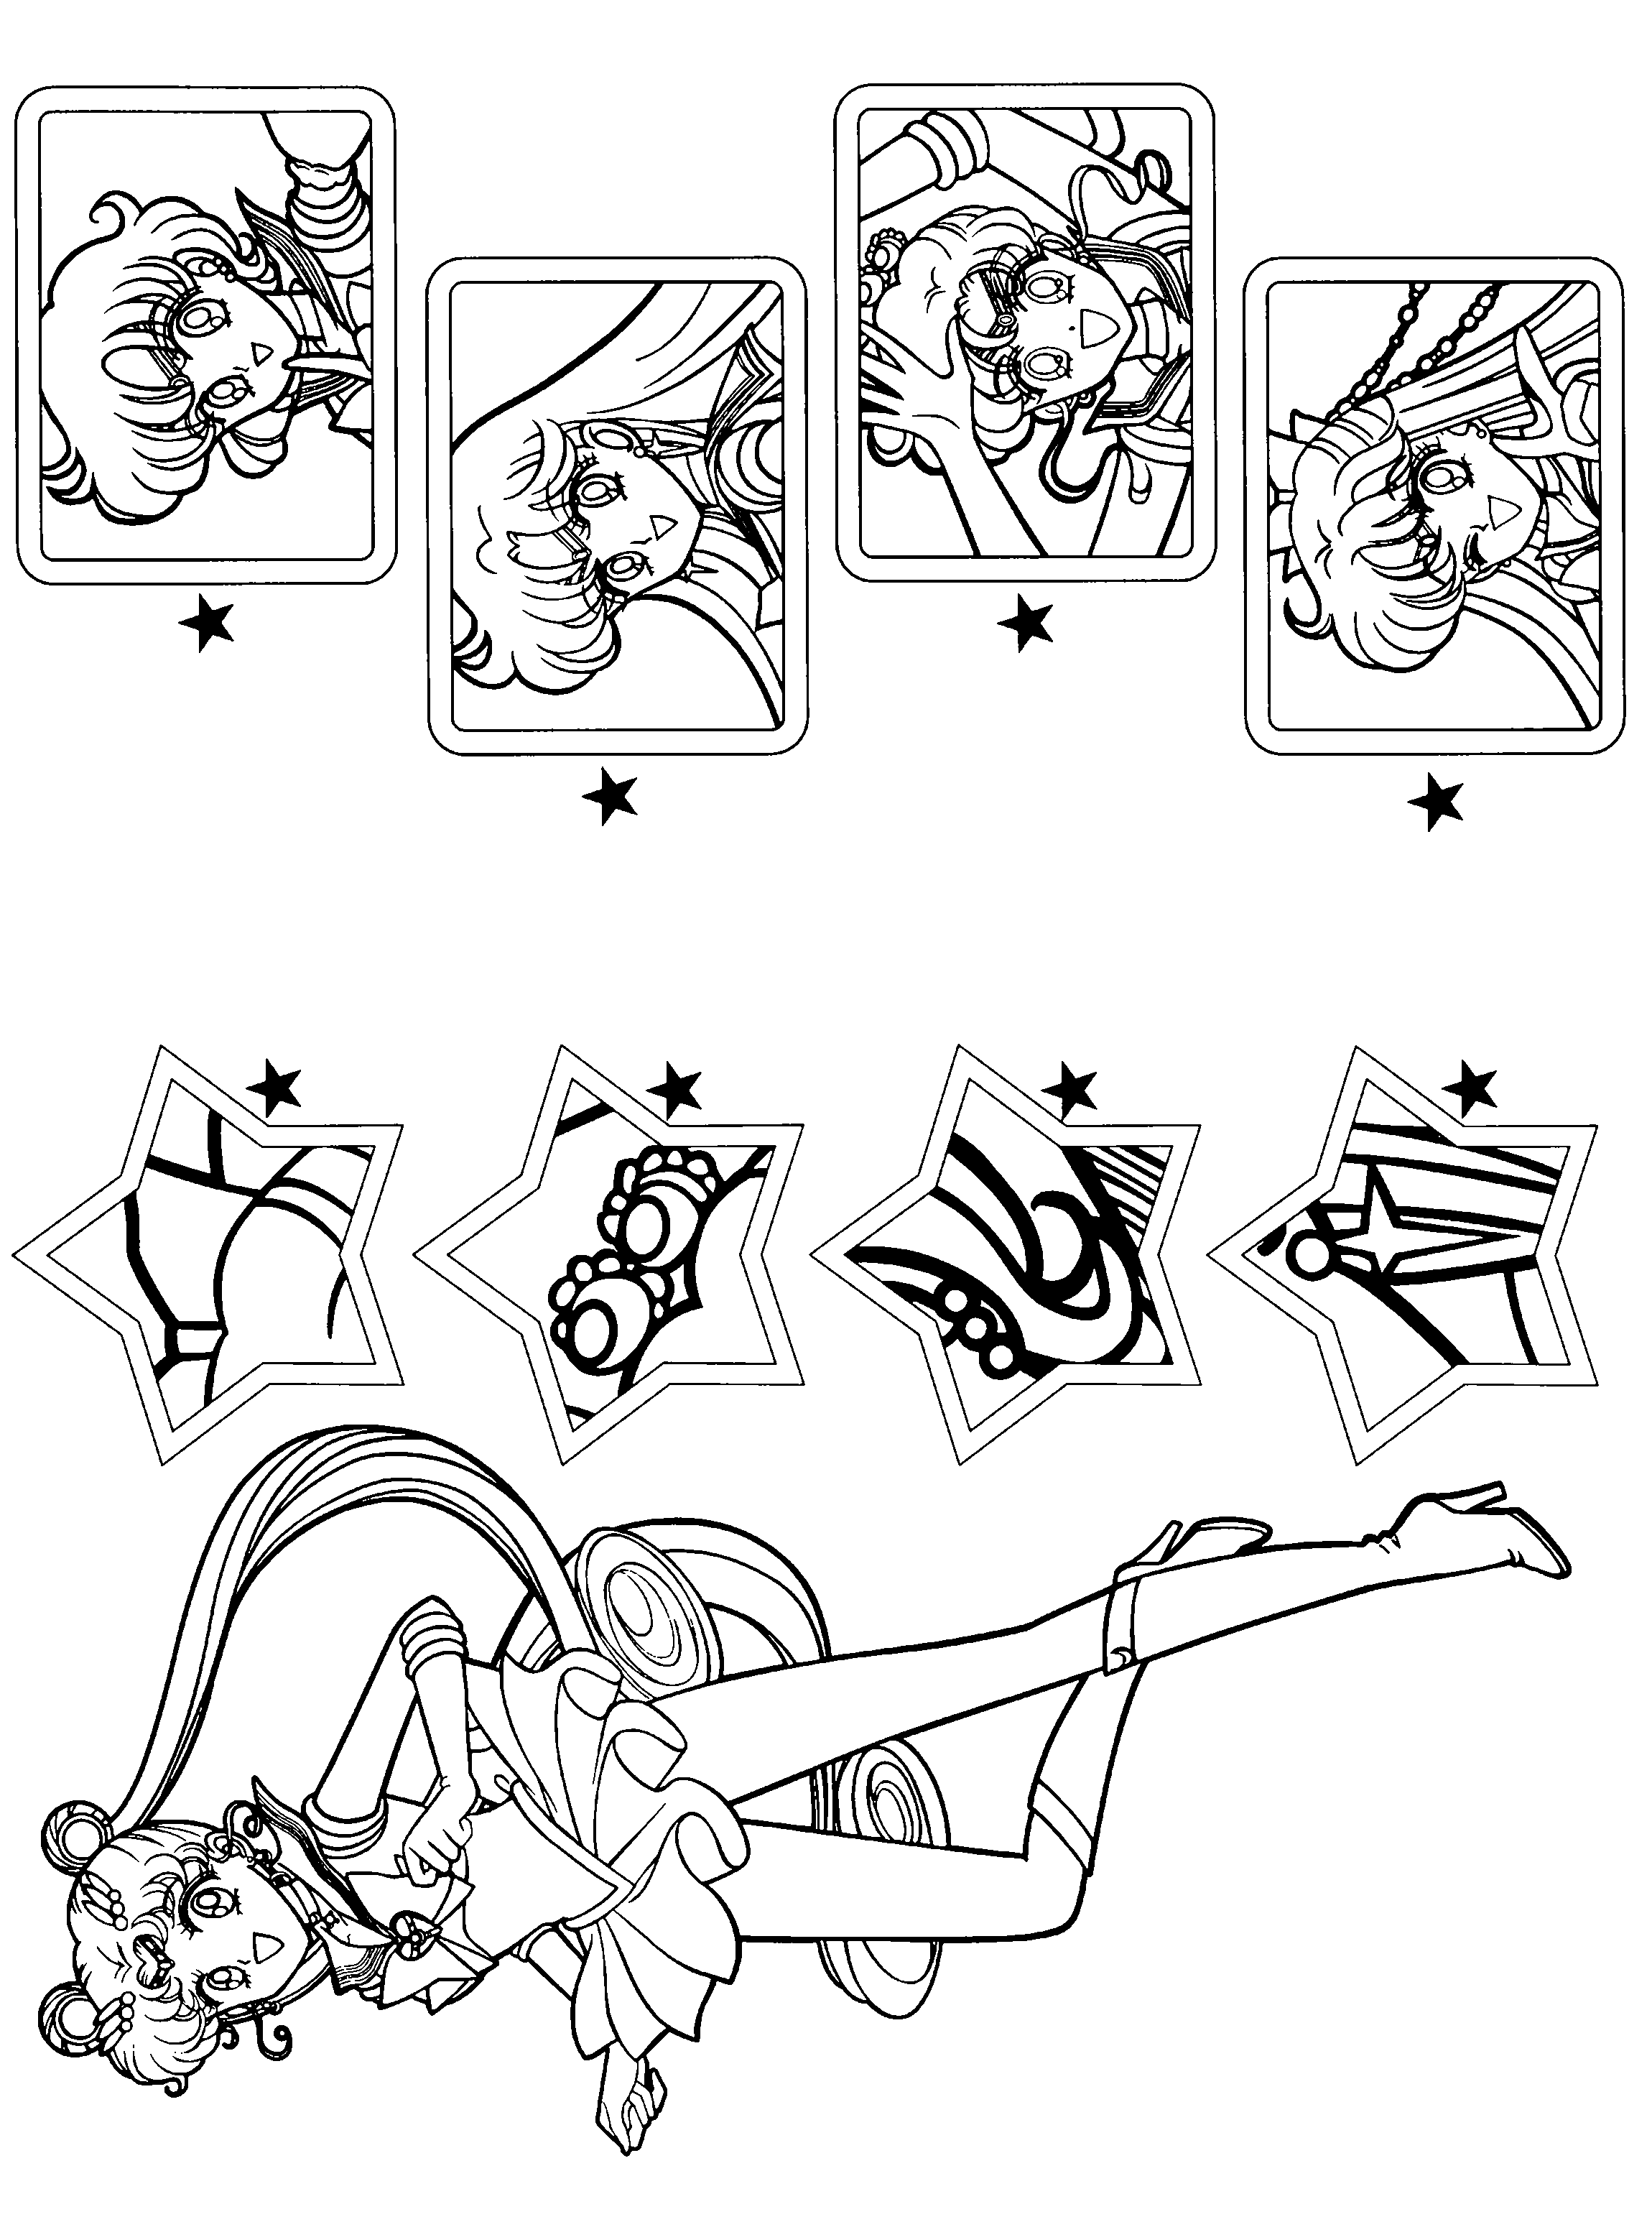 animated-coloring-pages-sailor-moon-image-0080